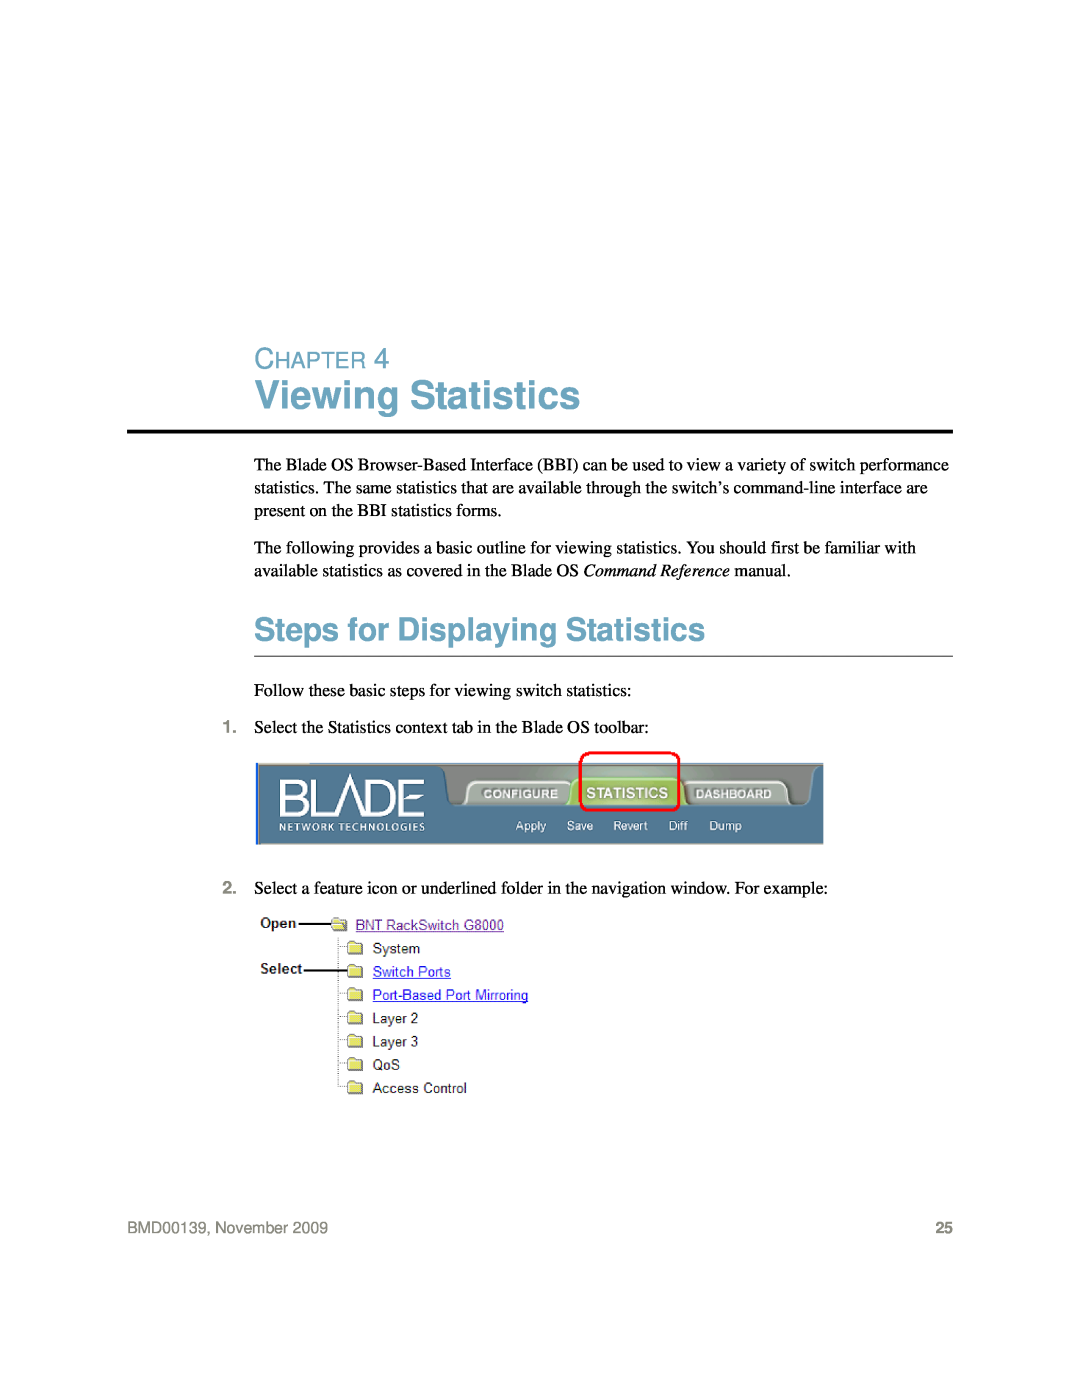 Blade ICE G8000 manual Viewing Statistics, Steps for Displaying Statistics, Chapter 